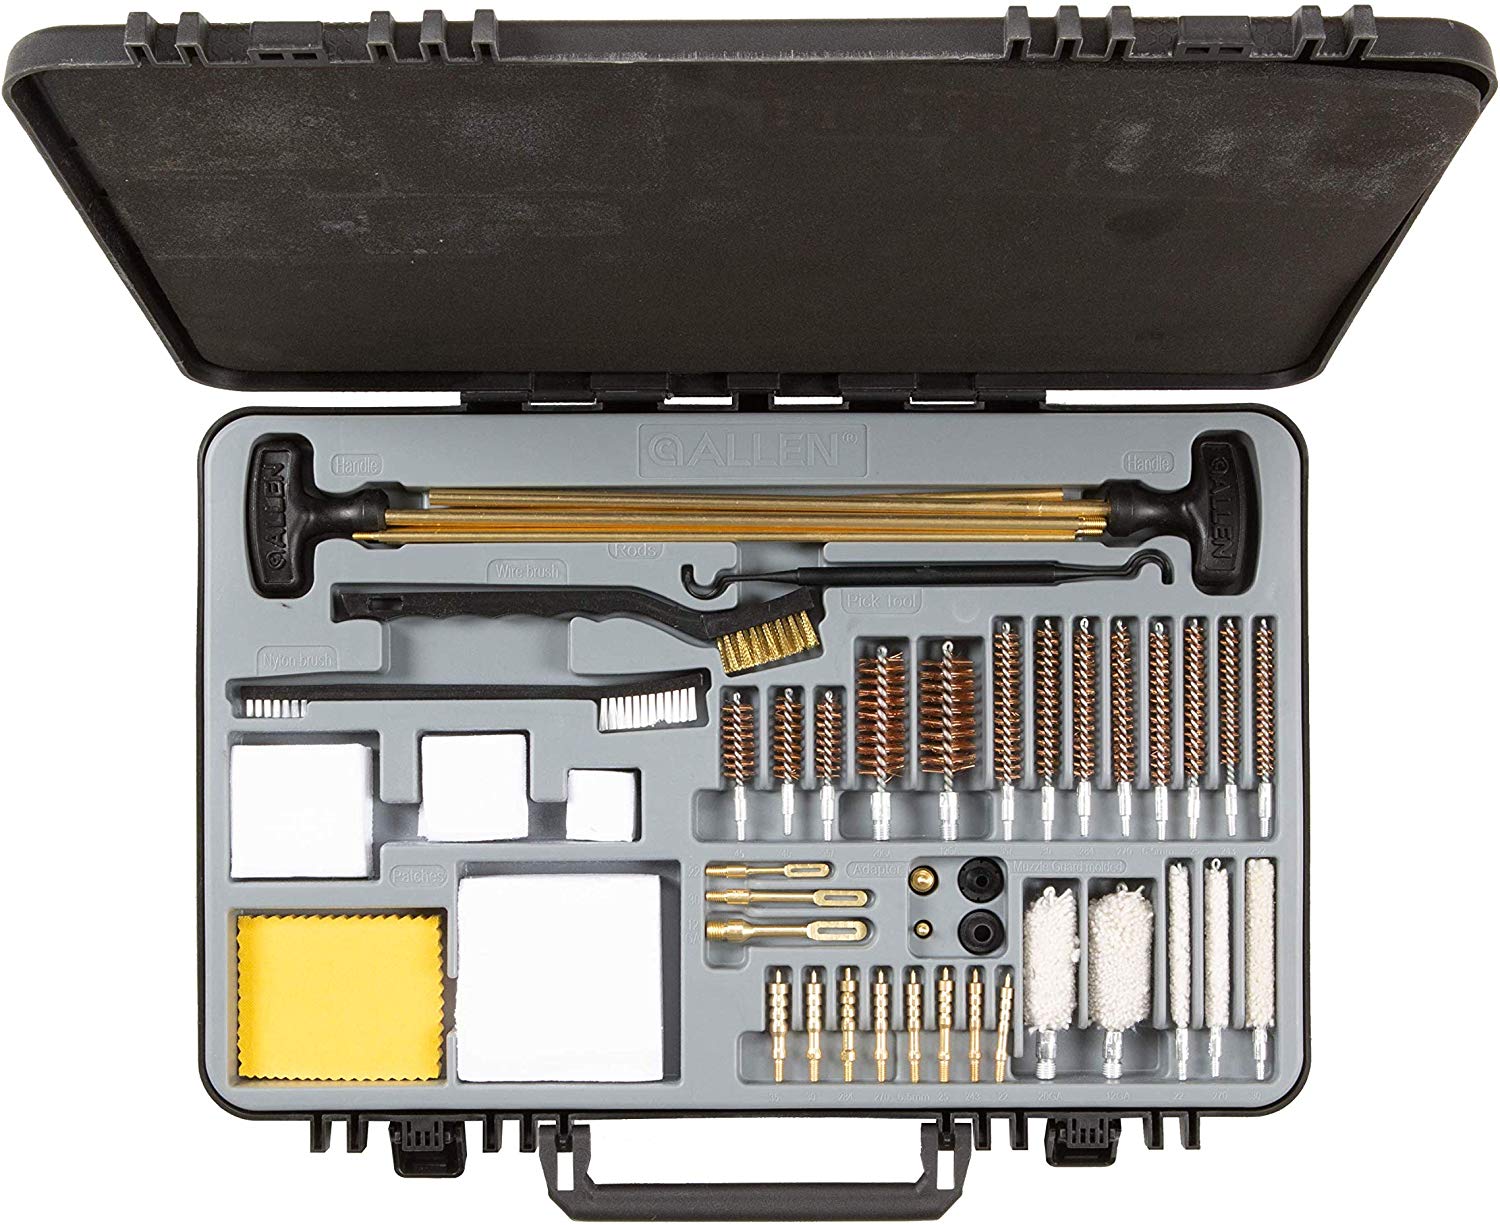 Allen Company Krome Large Premium Quality Universal Gun Cleaning Kit, 50 Piece, Black - $35.52 (Free S/H over $25)